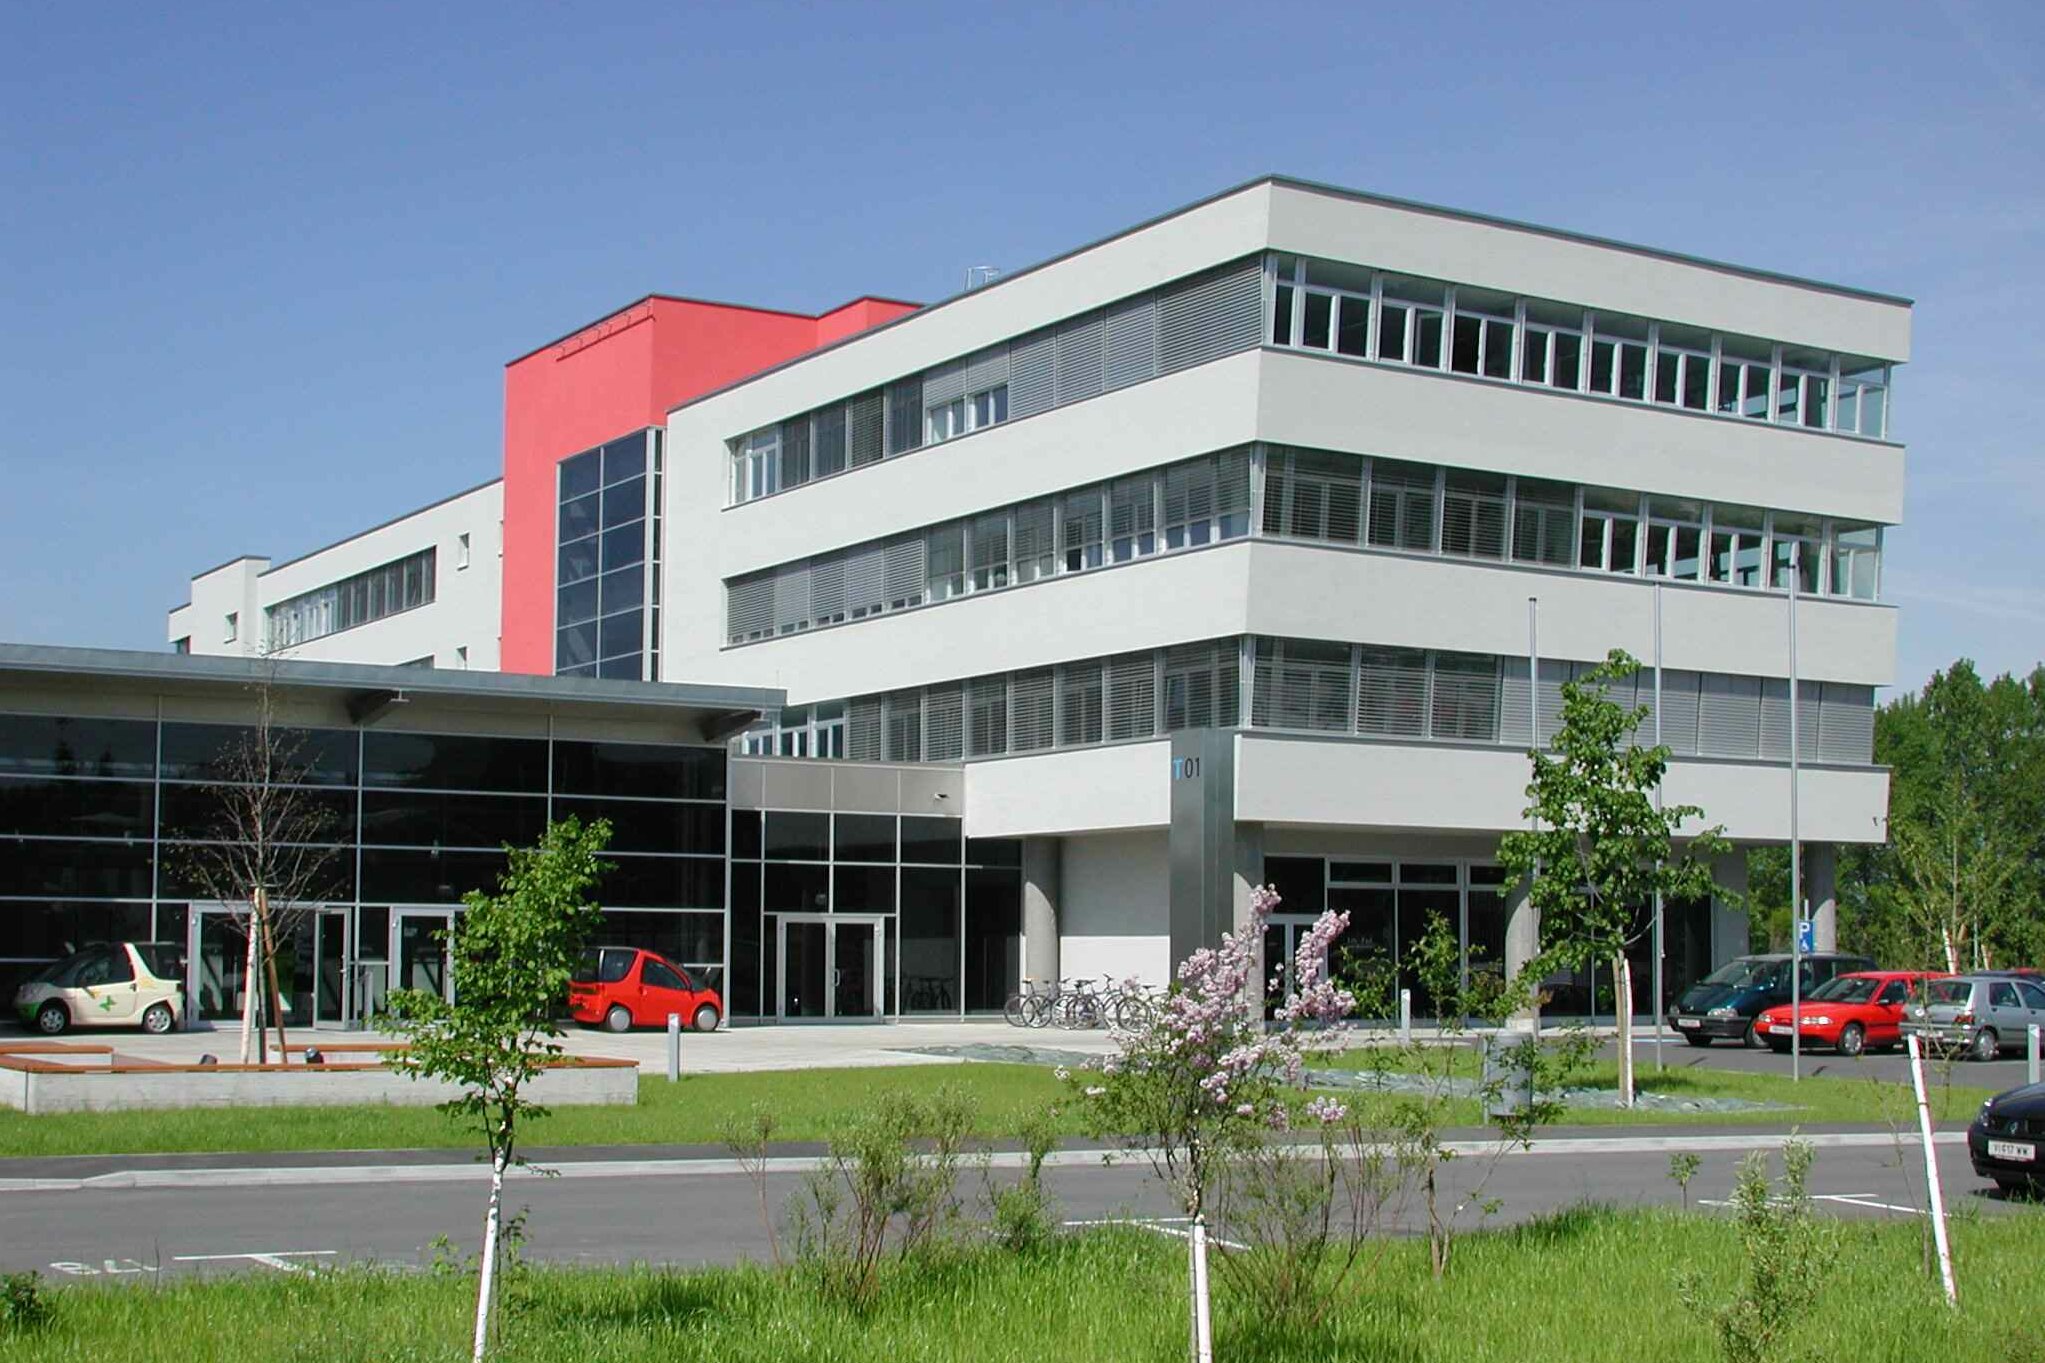 The building of the FH campus in Villach